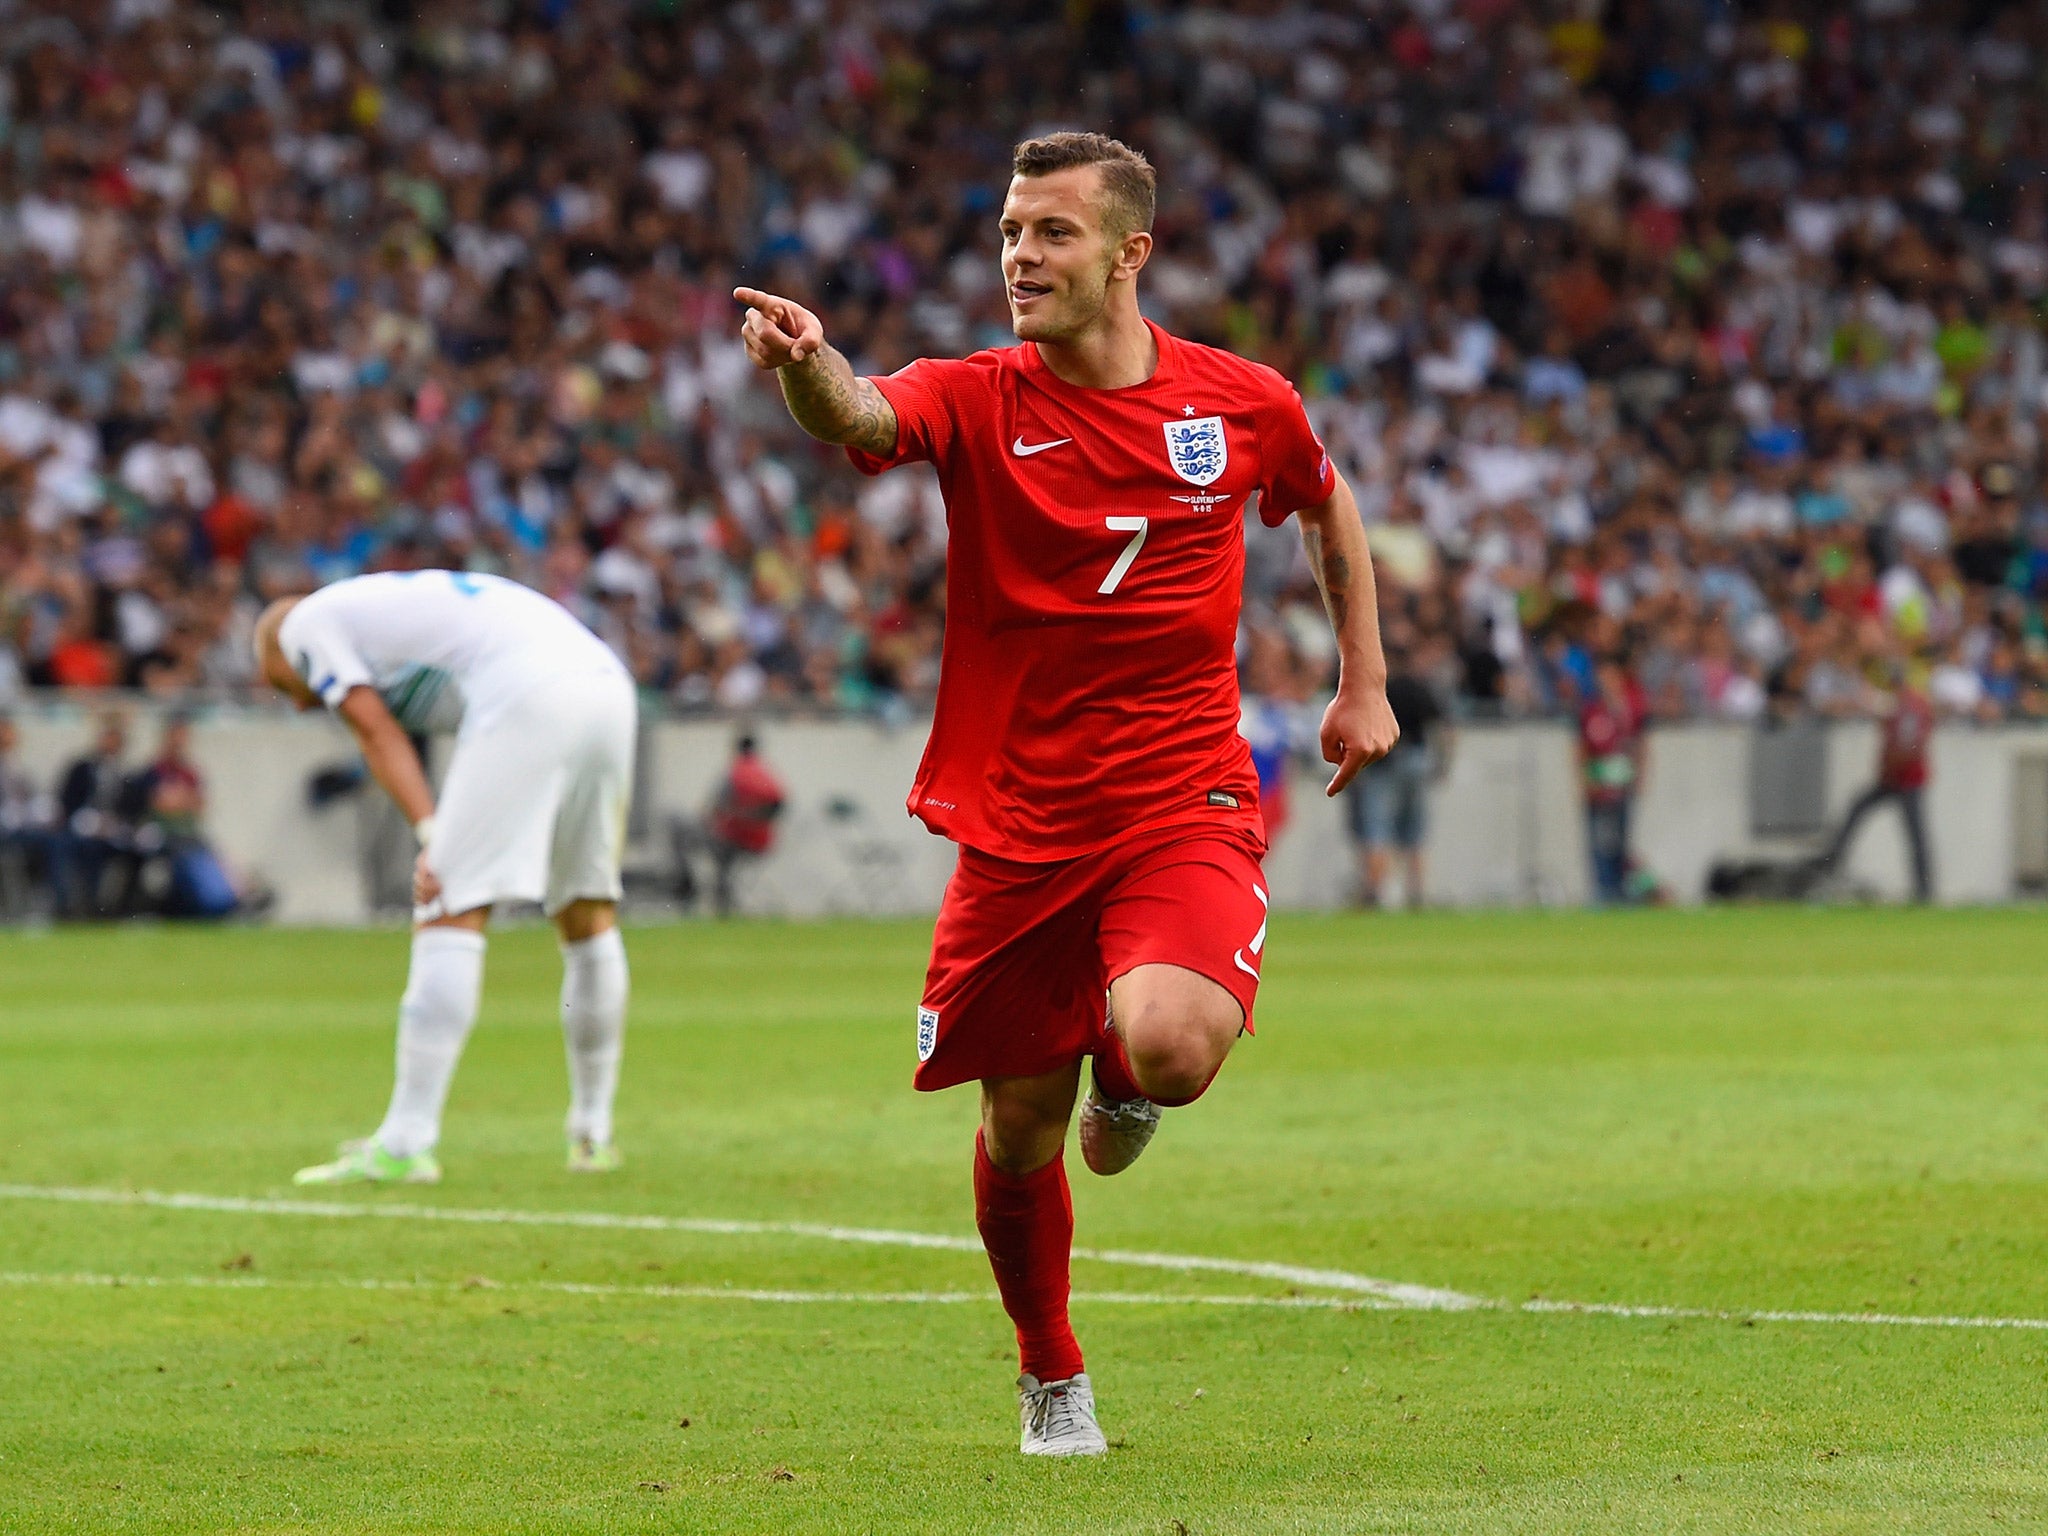 Jack Wilshere last played for England in June 2015